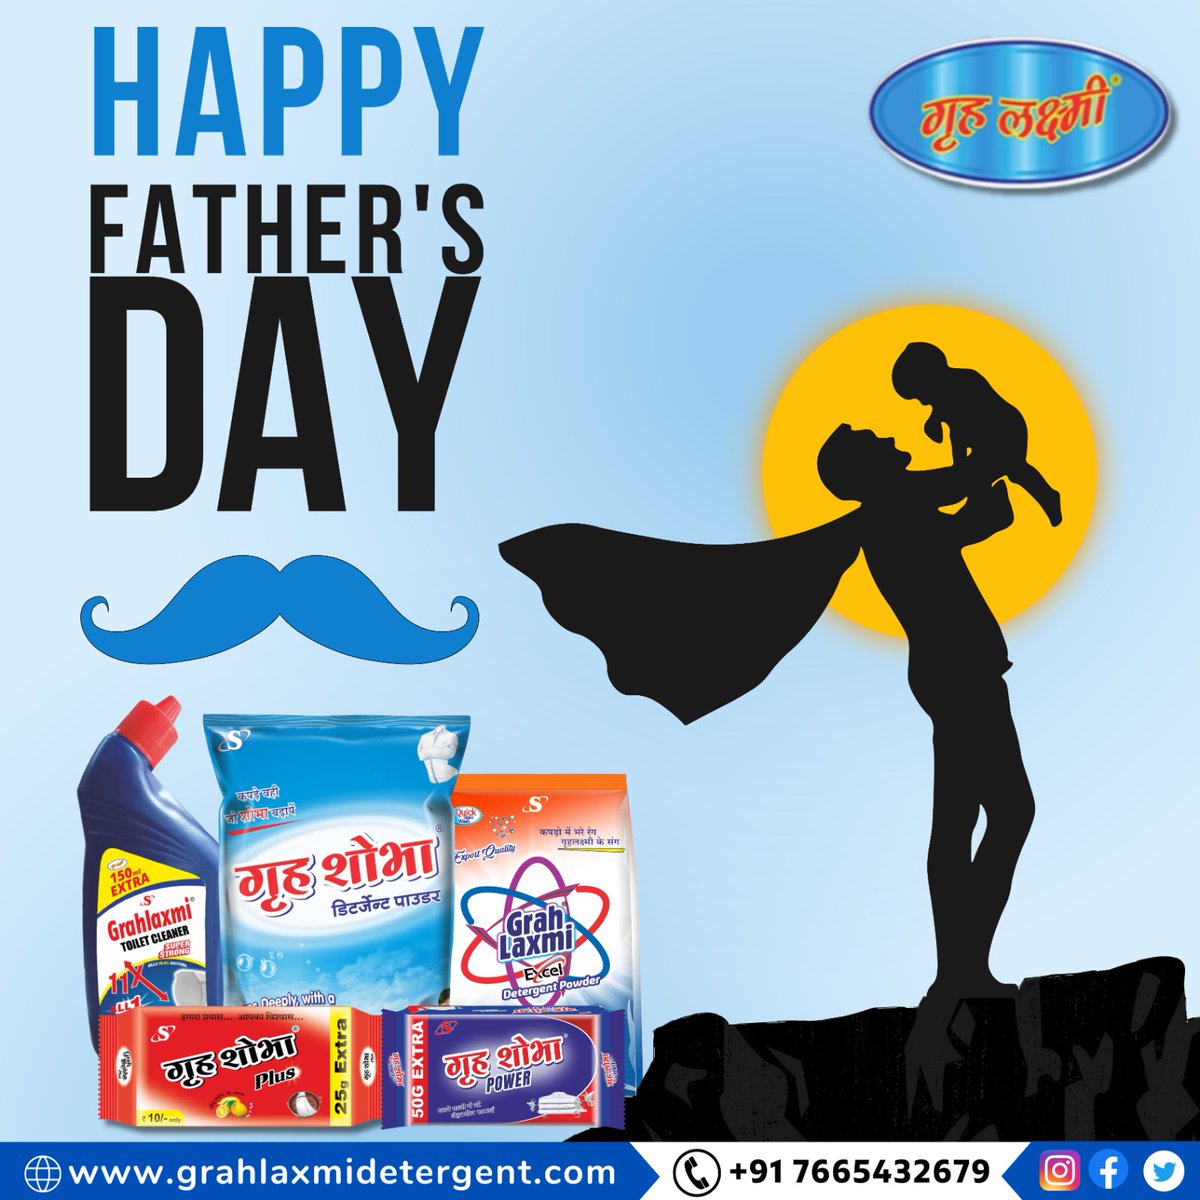 HAPPY FATHER'S DAY 🌸💕🌸💕
#fatherday #fathersday #father #dad #fatherdaygift #diadelpadre #love #birthday #mothersday #fathersdaygifts #happyfathersday #motherday #daddy #happybirthday #bouquet #family #fatherhood #mother #papa #gift #fathers #fatherson #grahlaxmijaipur